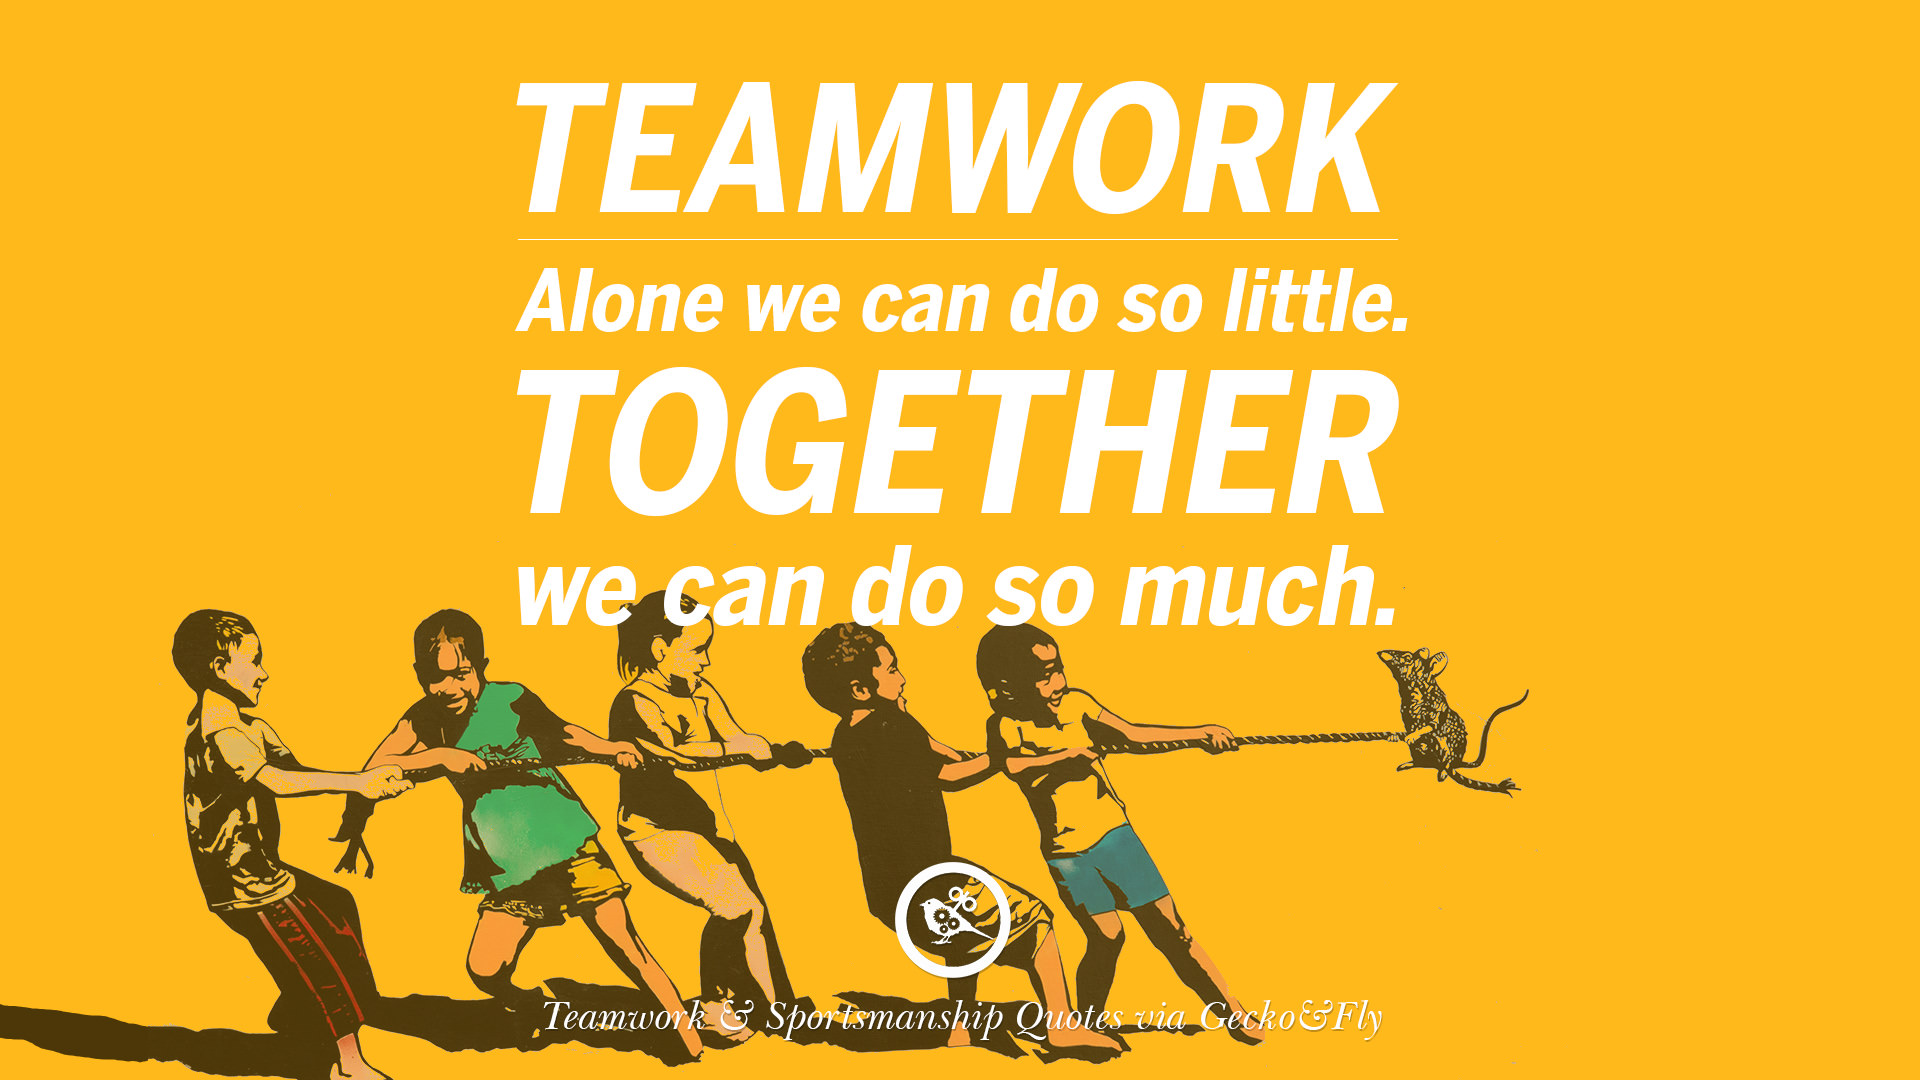 teamwork alone we can do so little. together we can do so much.